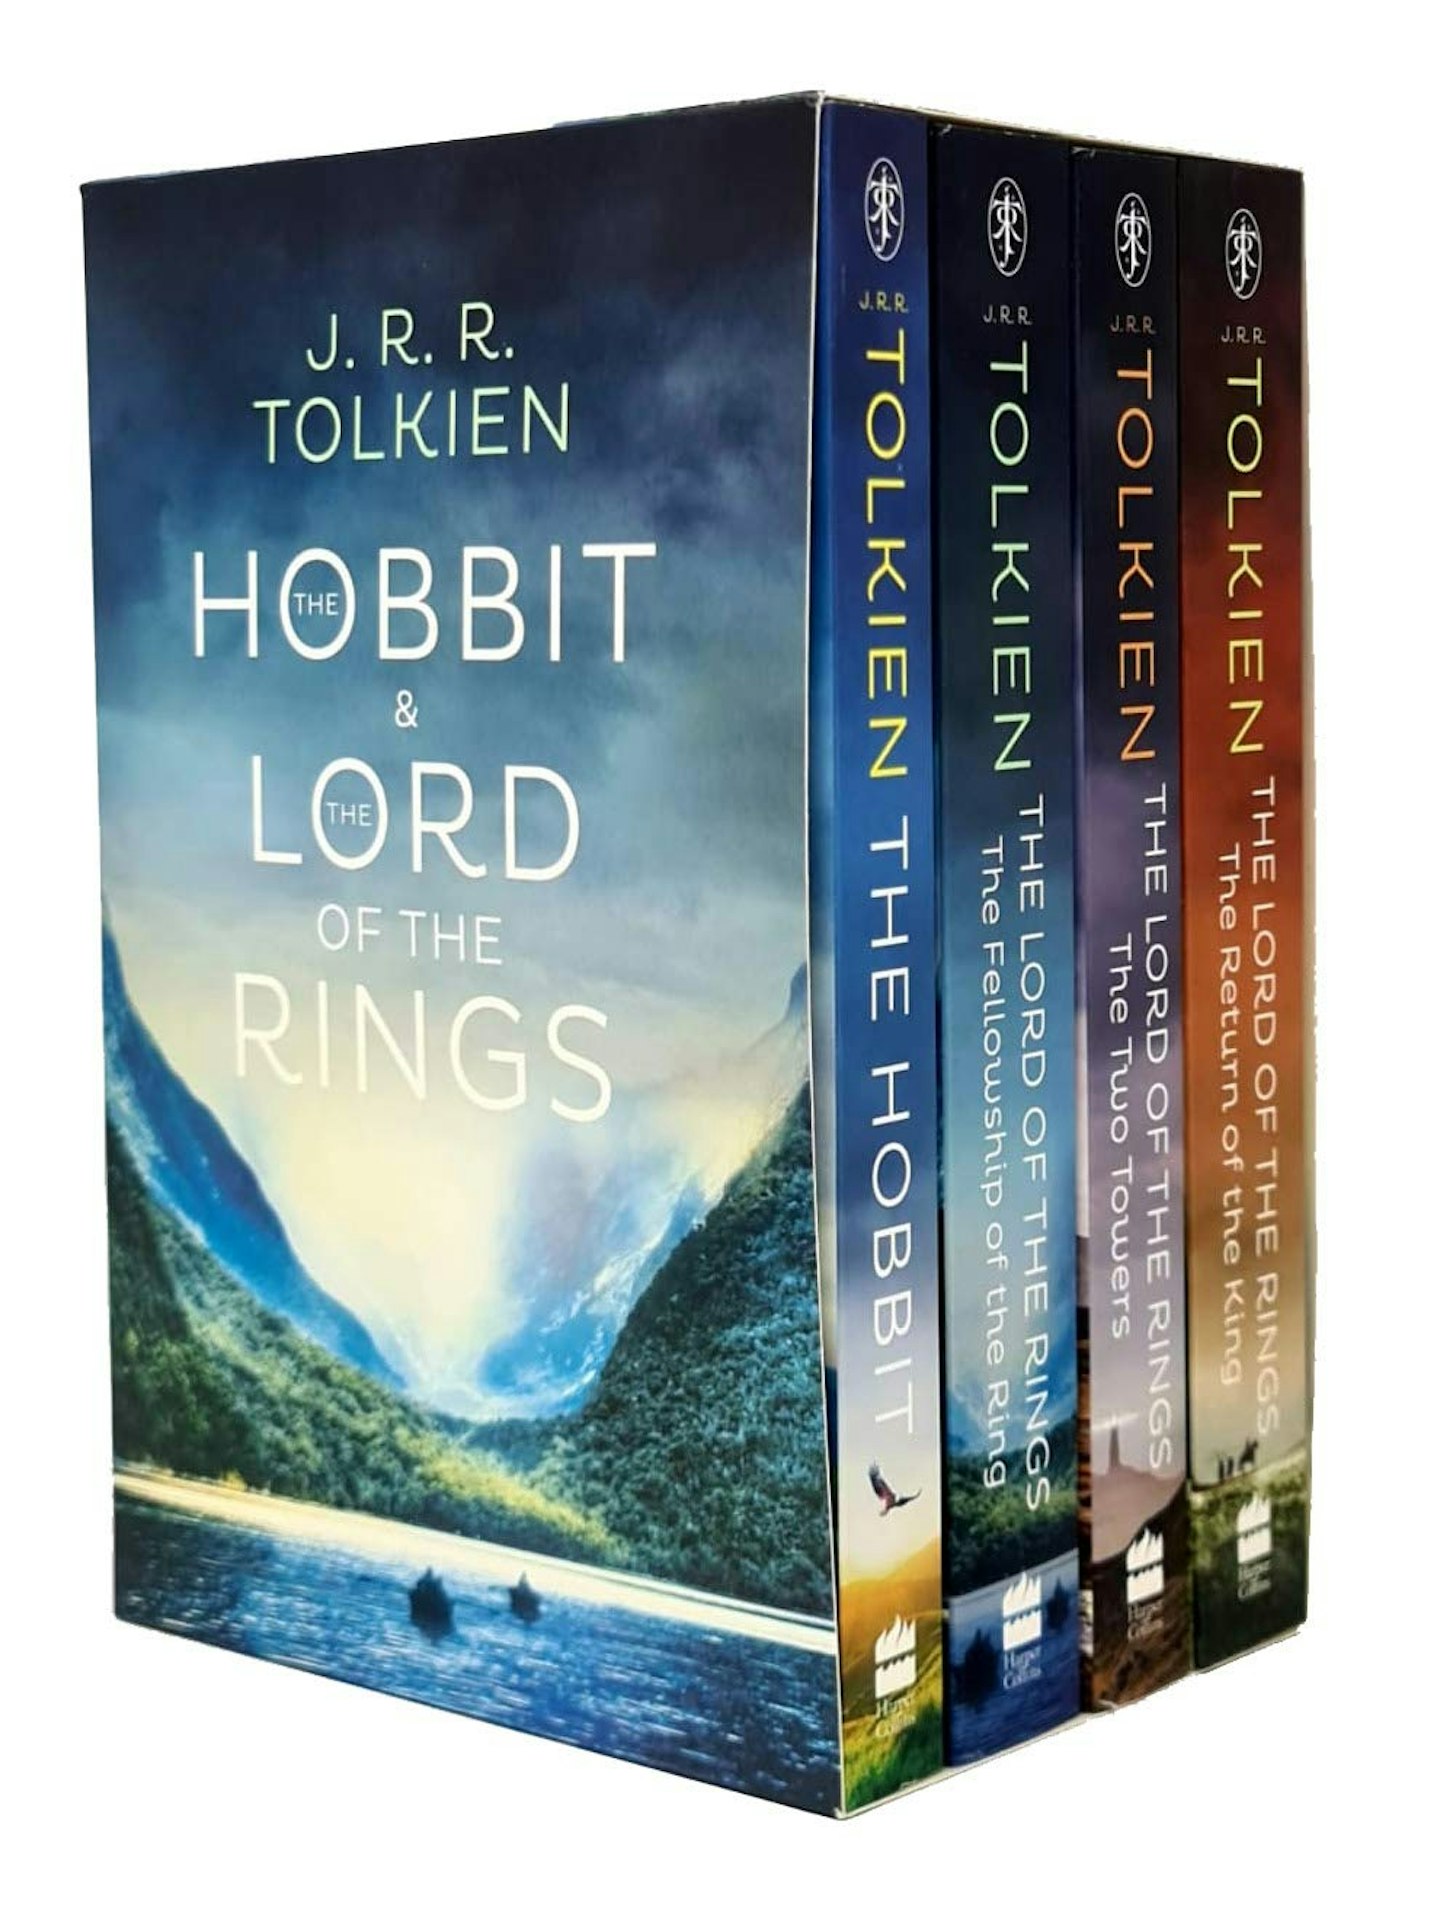 The Hobbit & The Lord of the Rings 4 Books Boxed Set By J. R. R. Tolkien